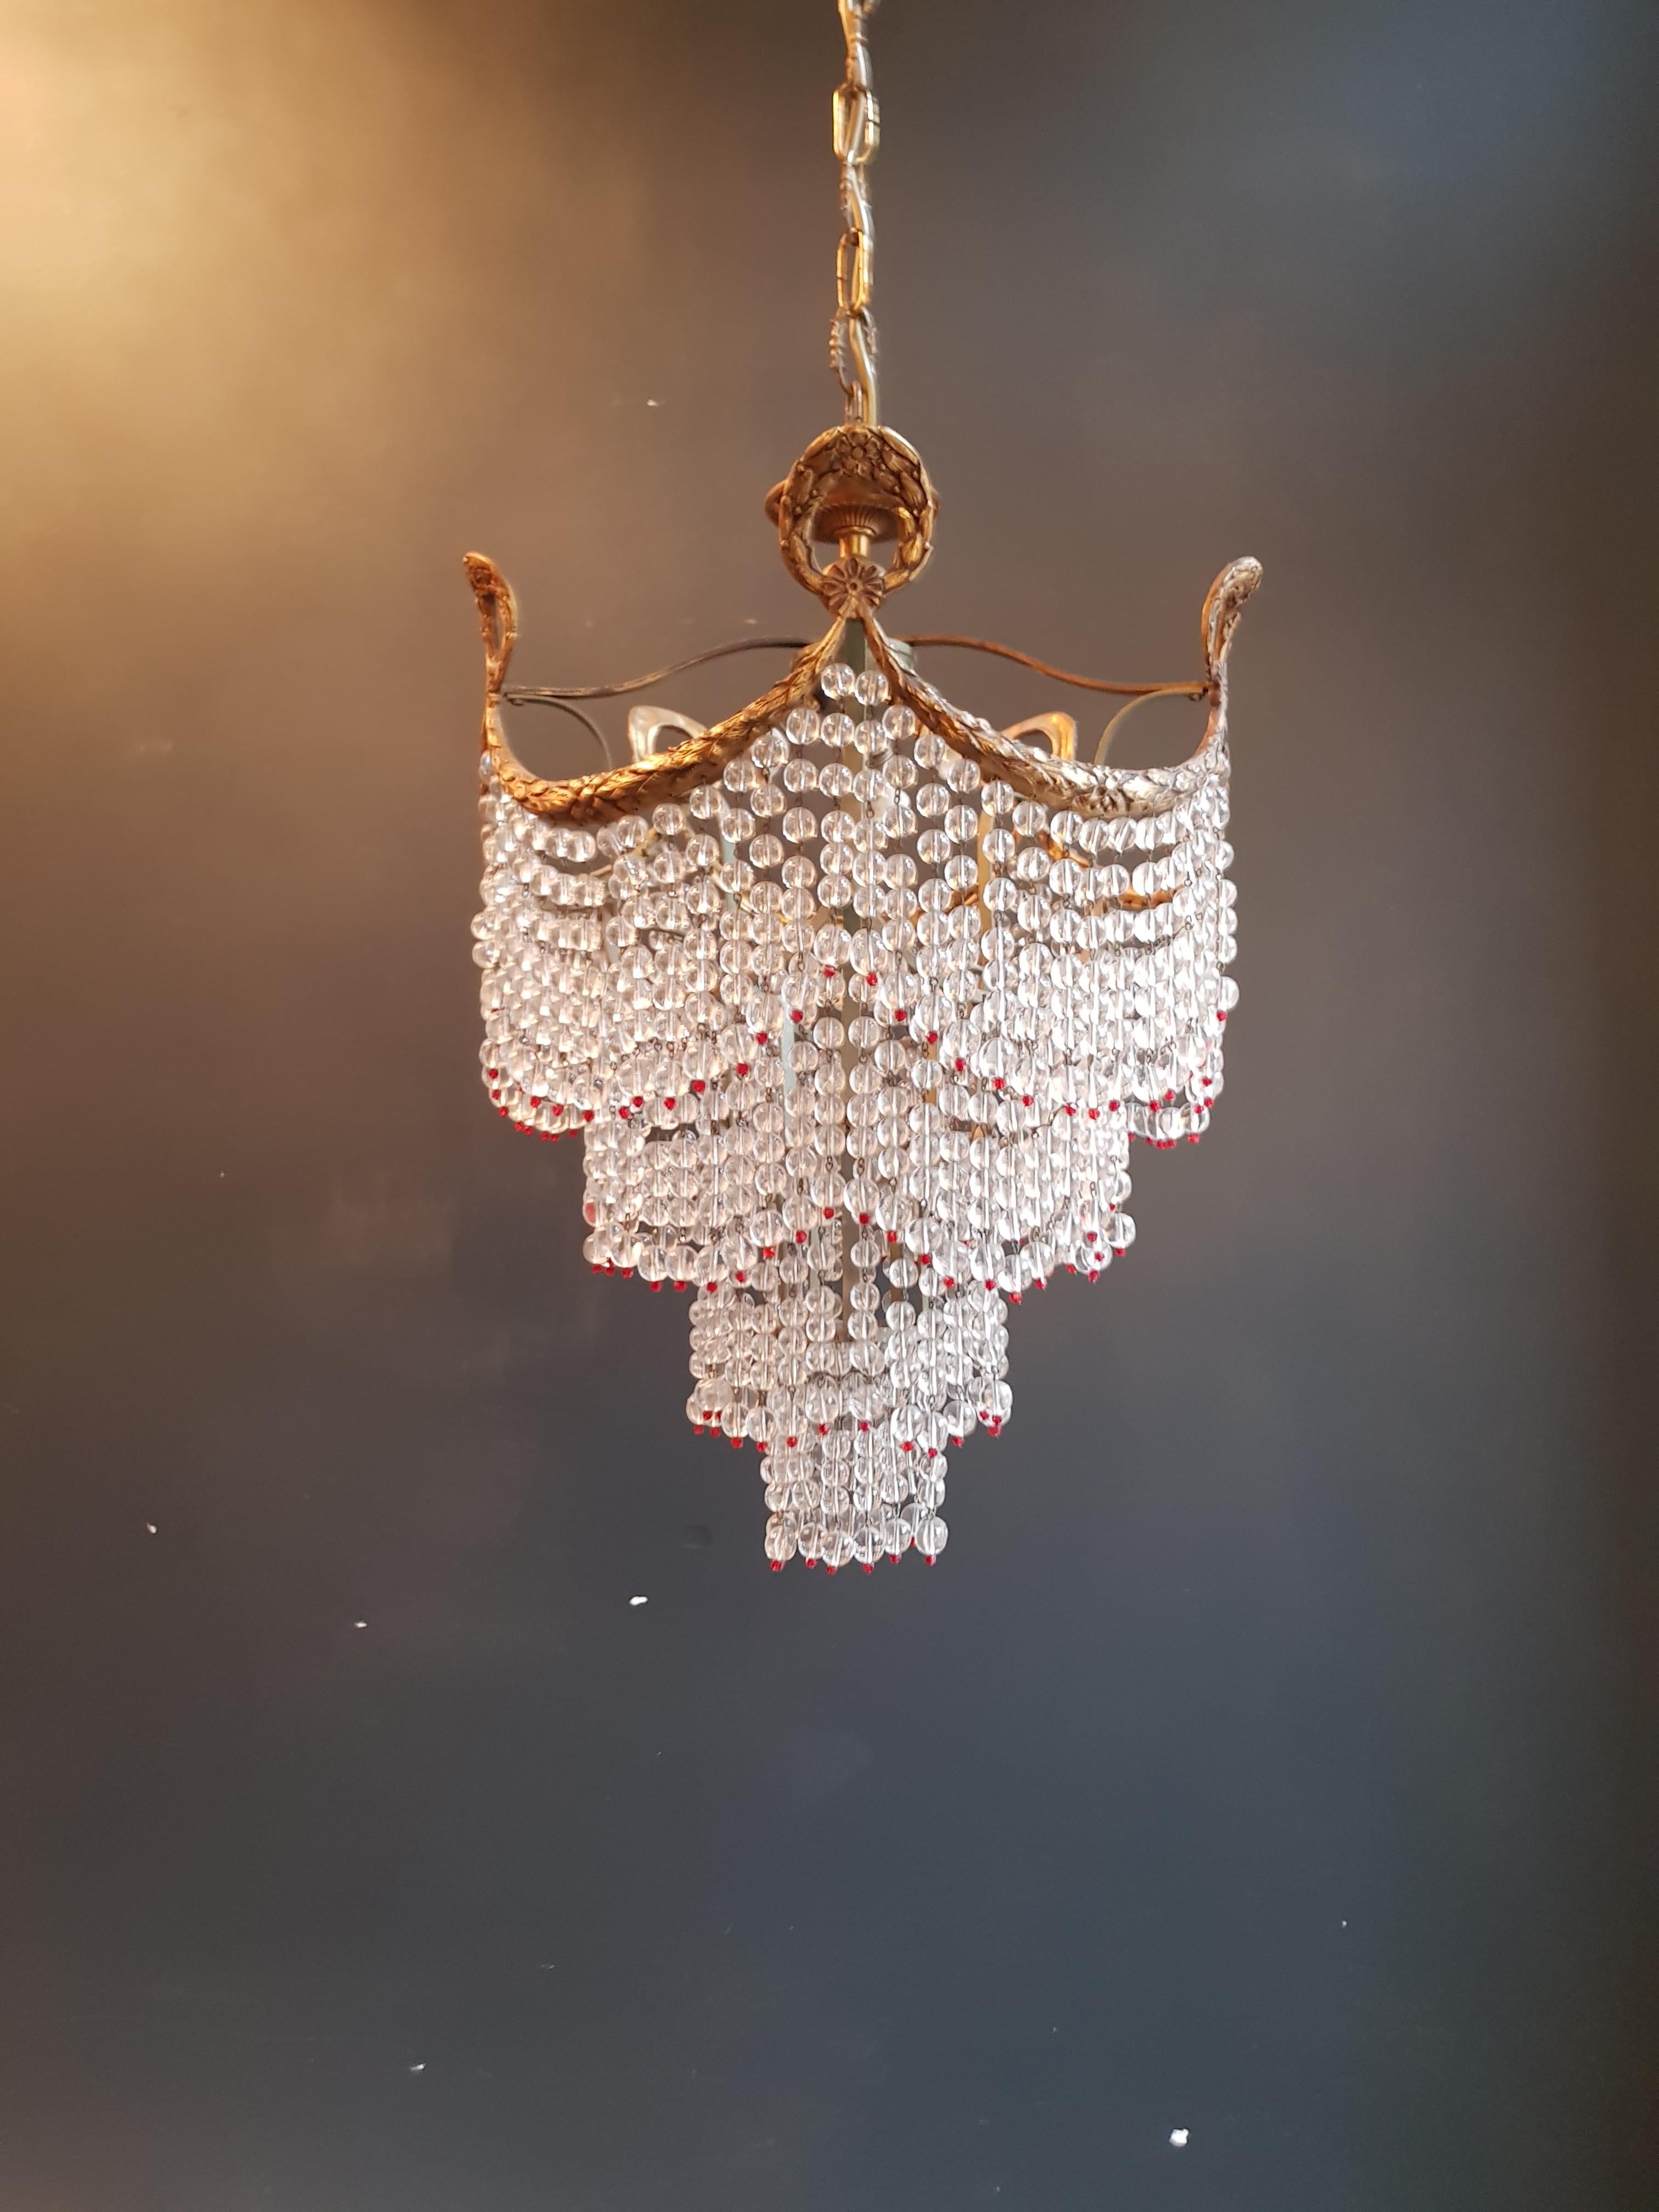 Mid-20th Century Beaded Waterfall Crystal Chandel Antique Ceiling Lamp Lustre Art Nouveau